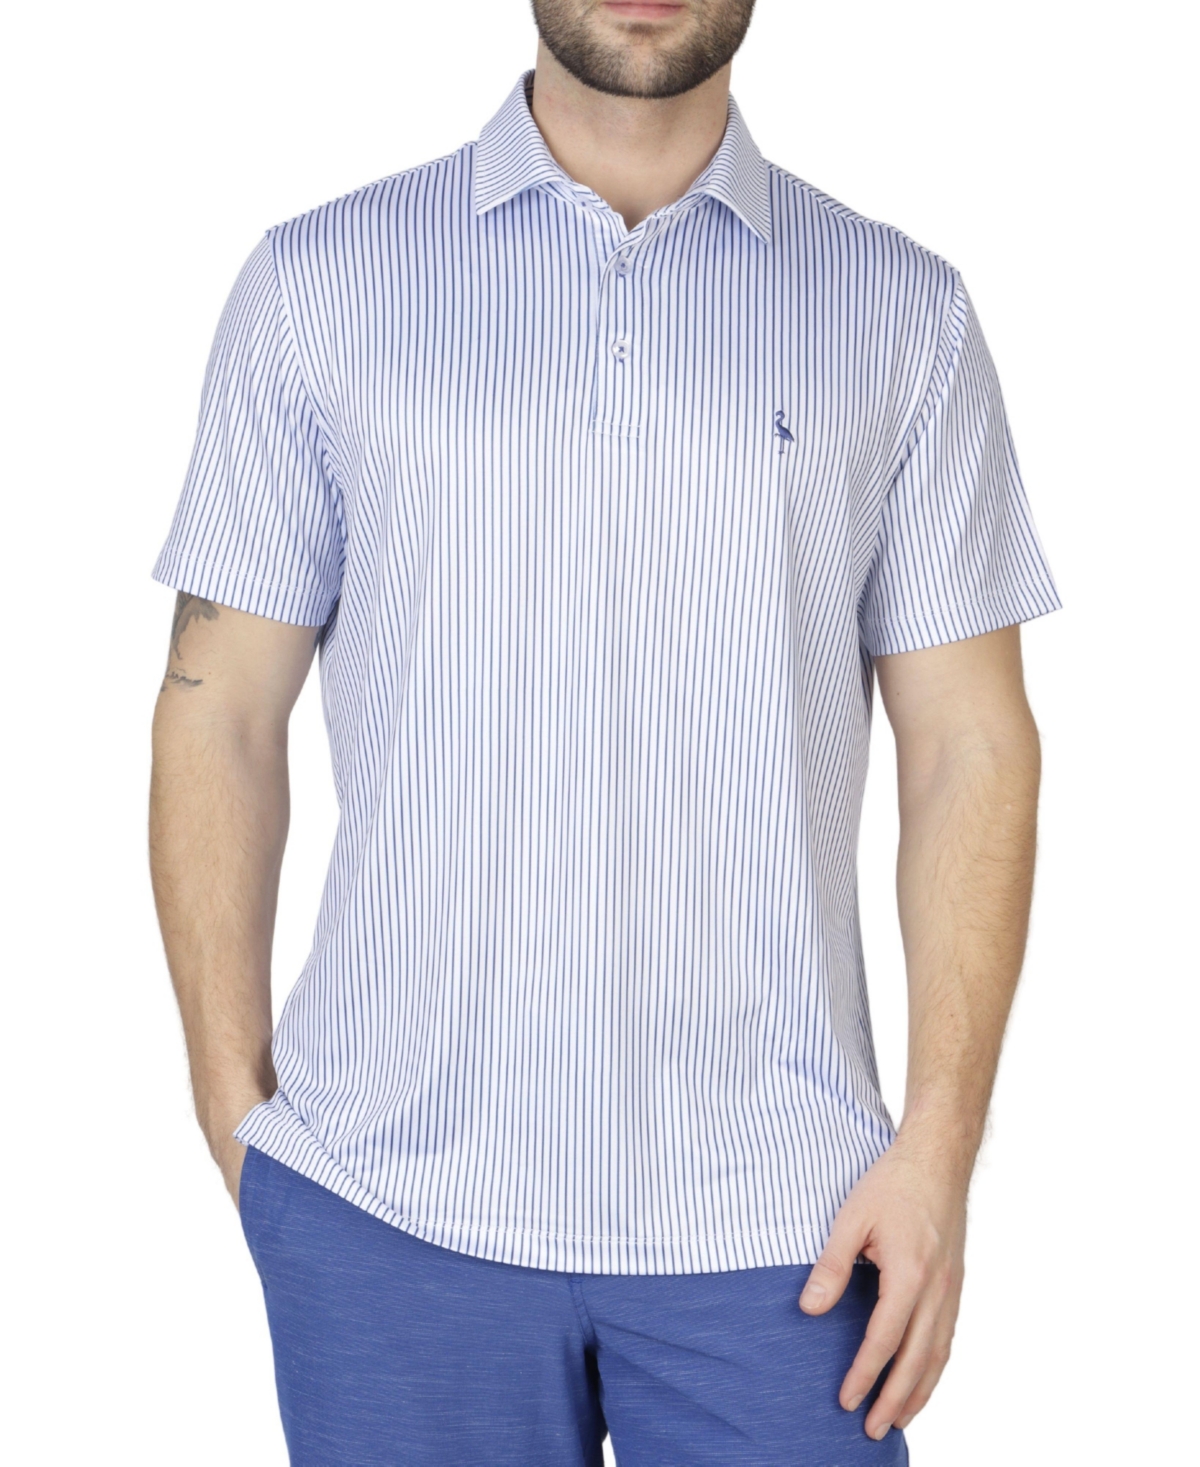 Stripes Performance Polo with Dress Shirt Collar - Admiral blue